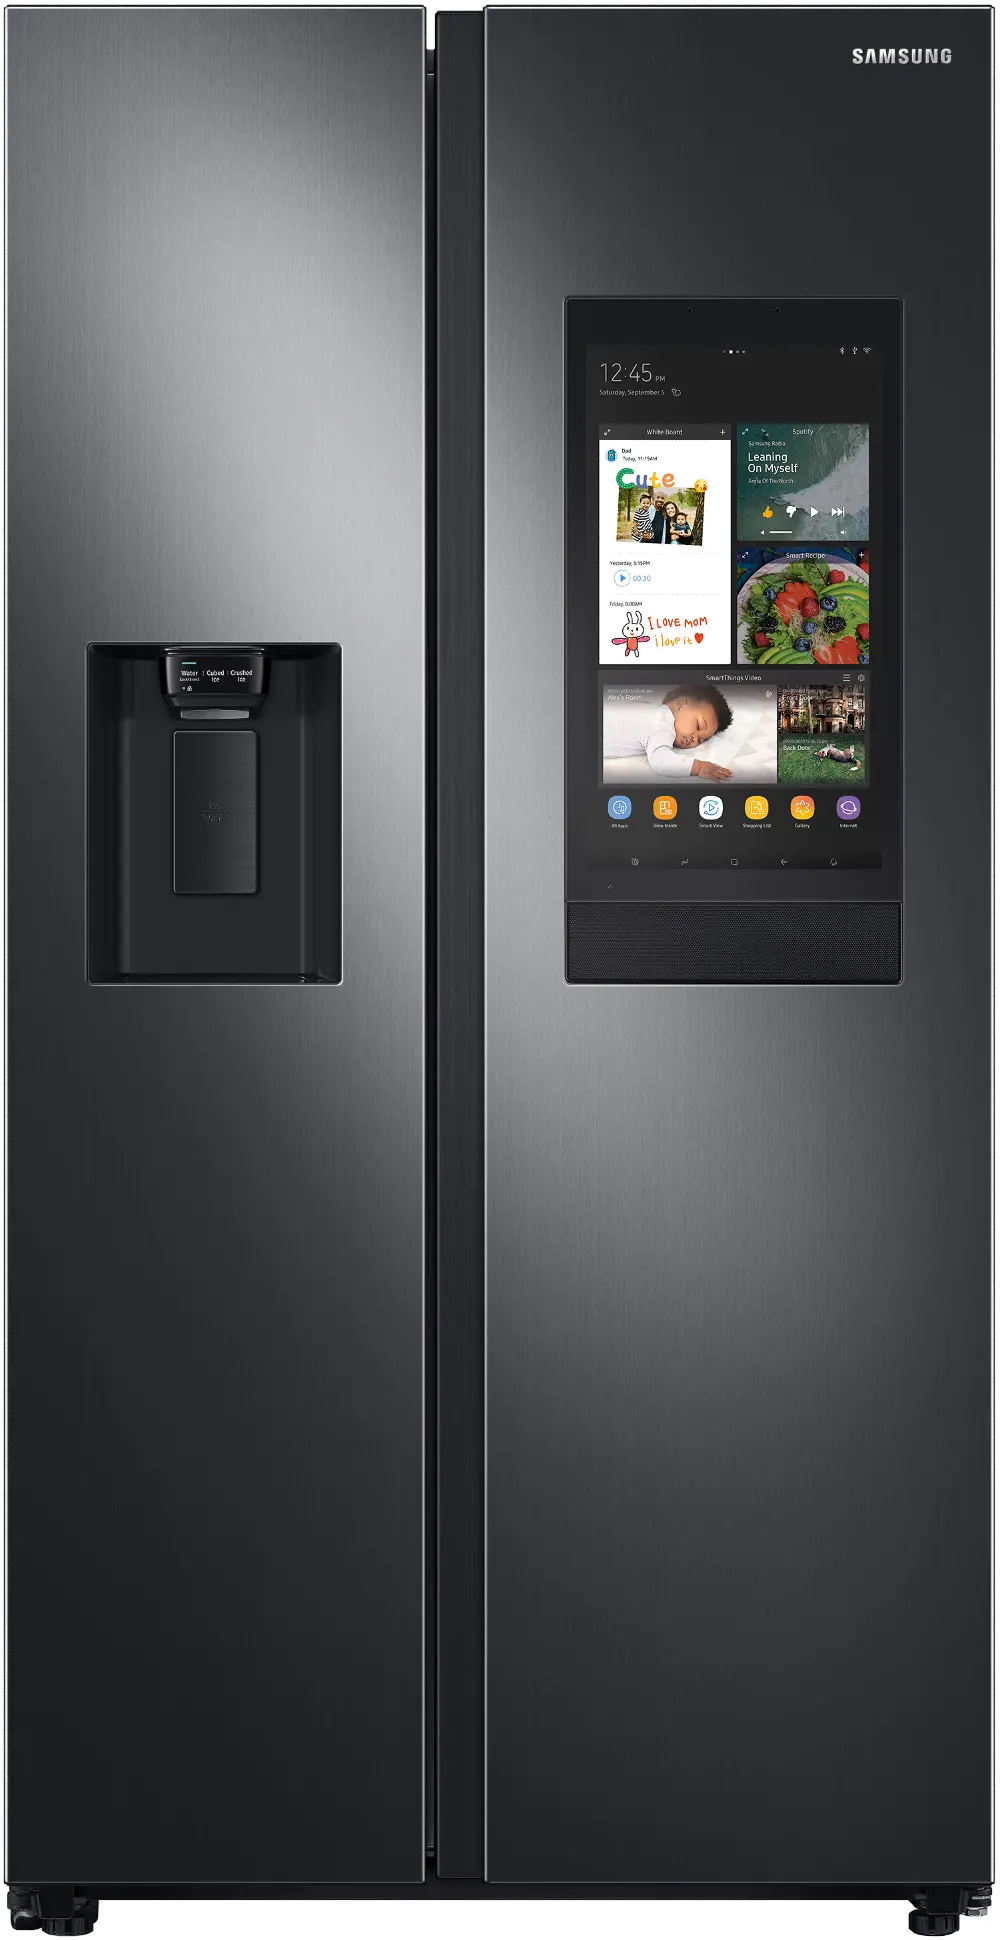 RS27T5561SG Samsung 26.7 cu ft Side by Side Refrigerator - Black Stainless Steel-1